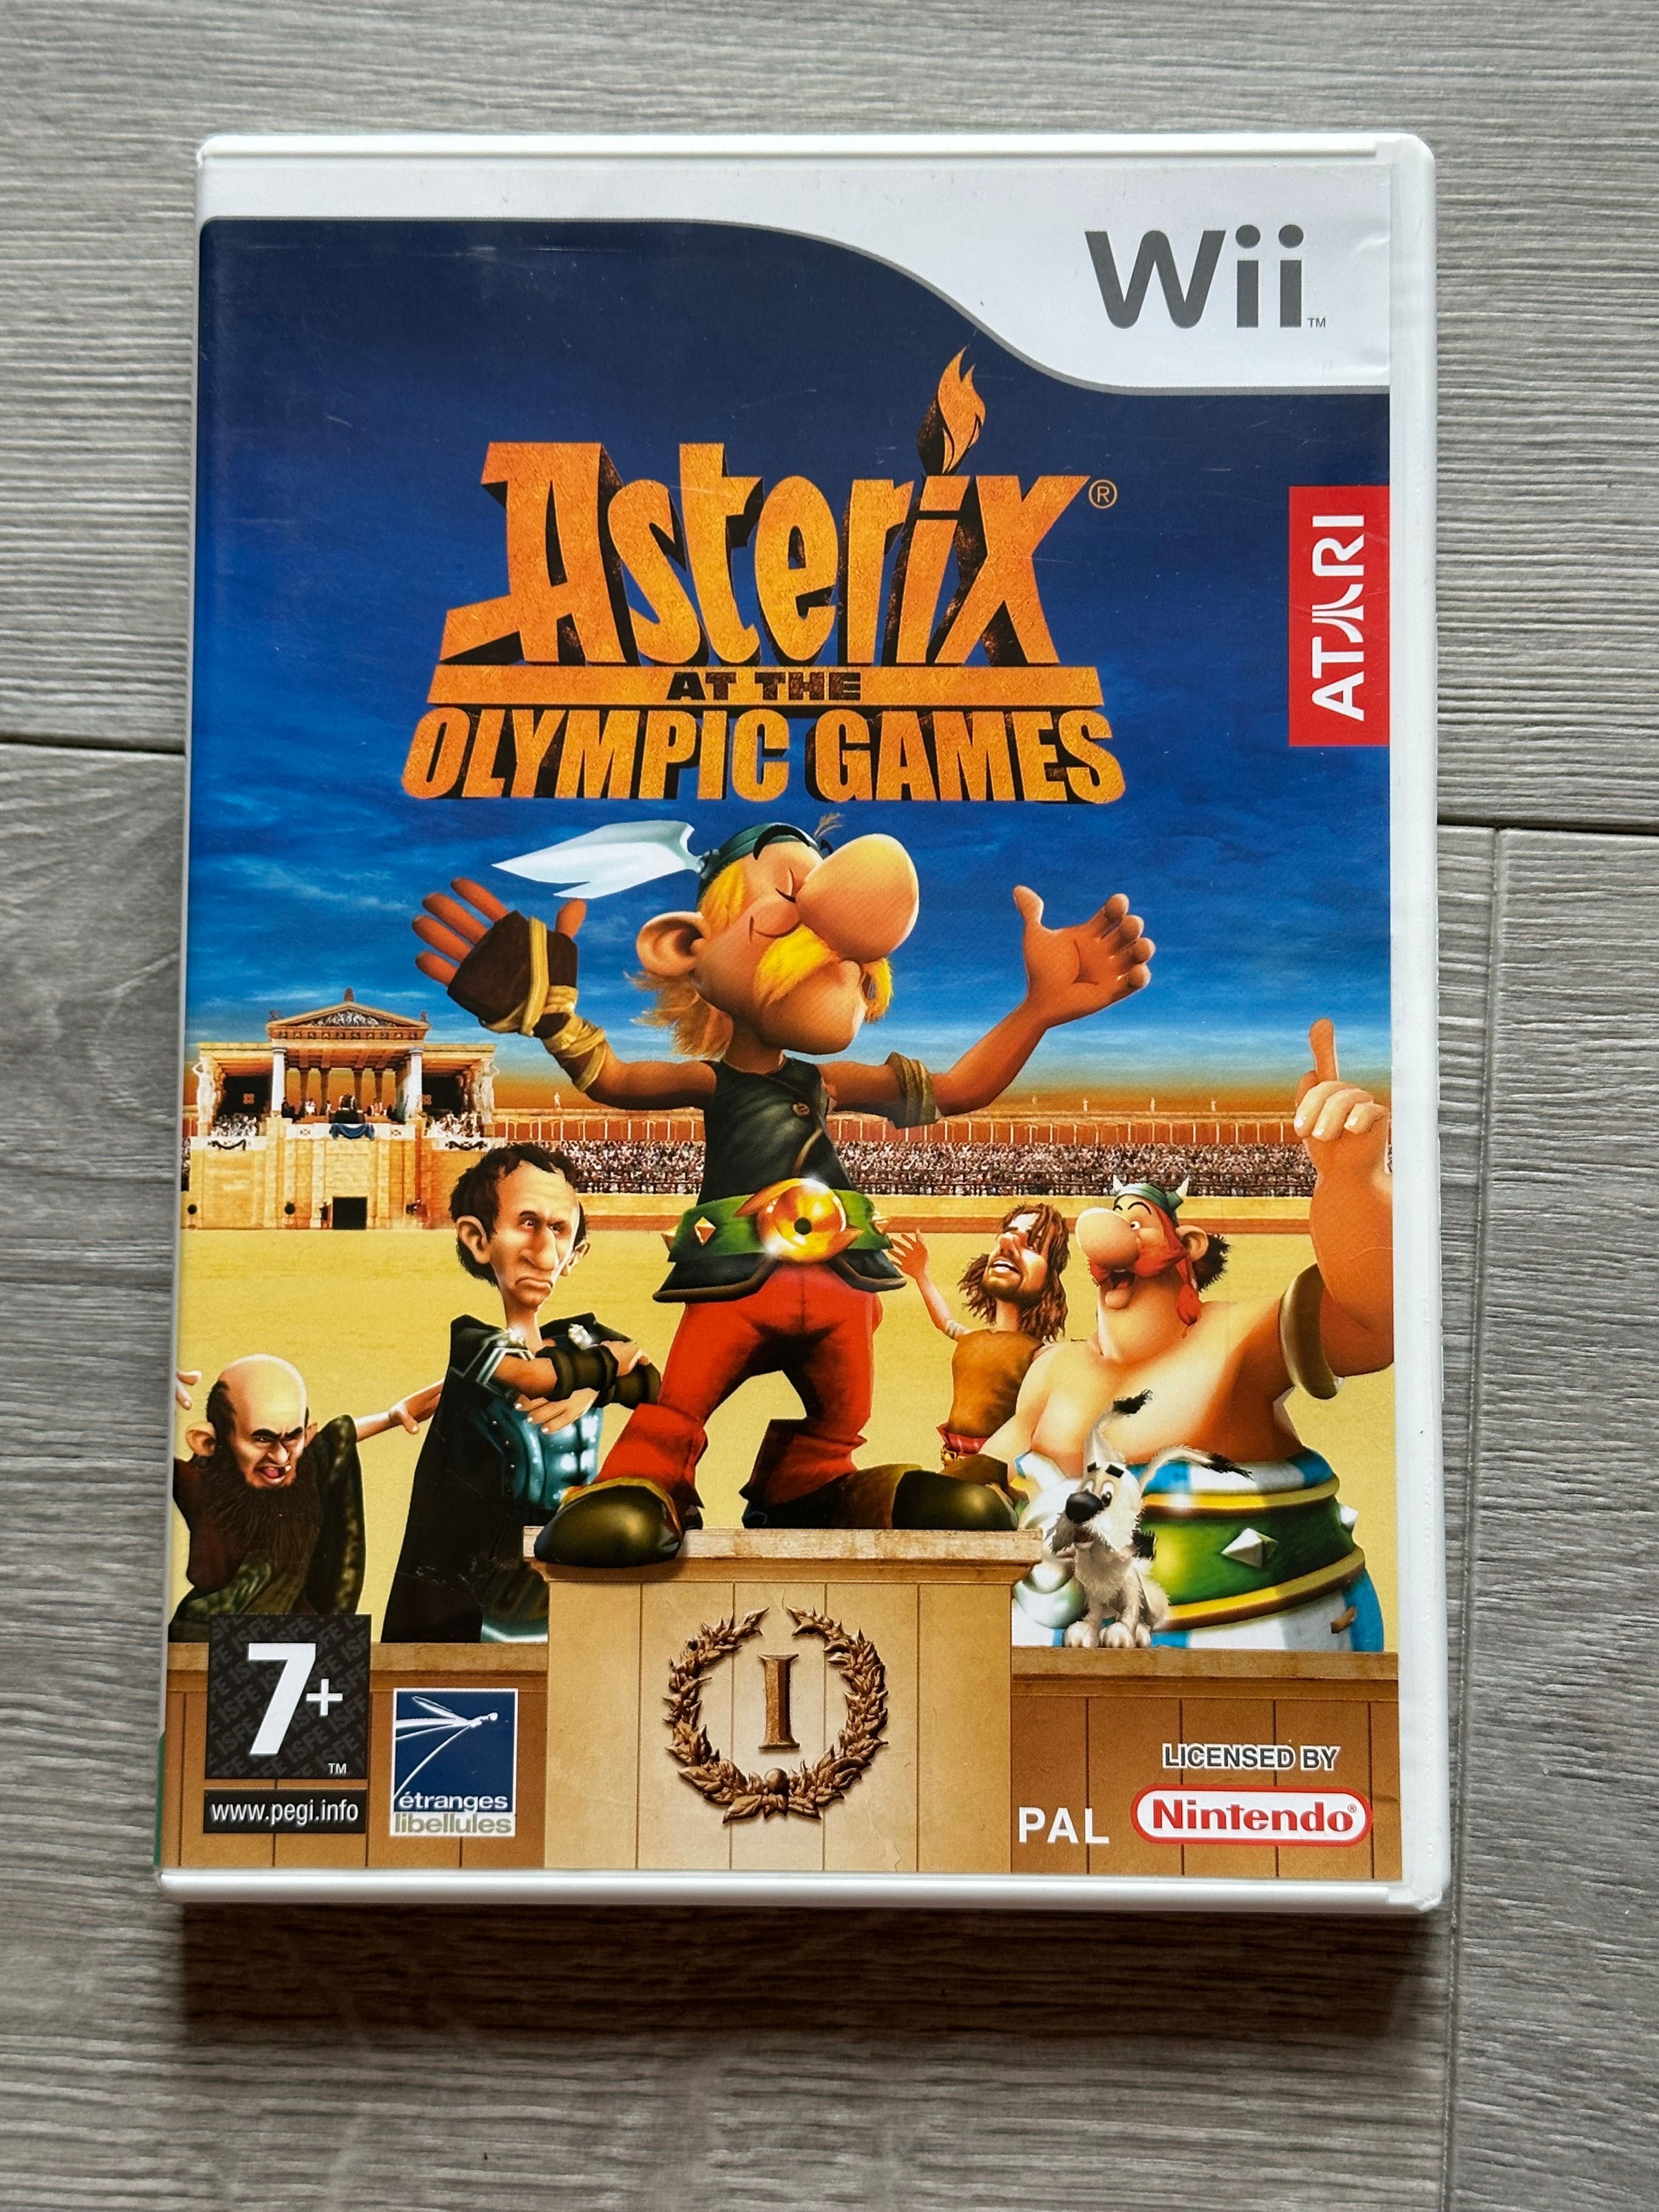 Asterix at the Olympic Games / Wii